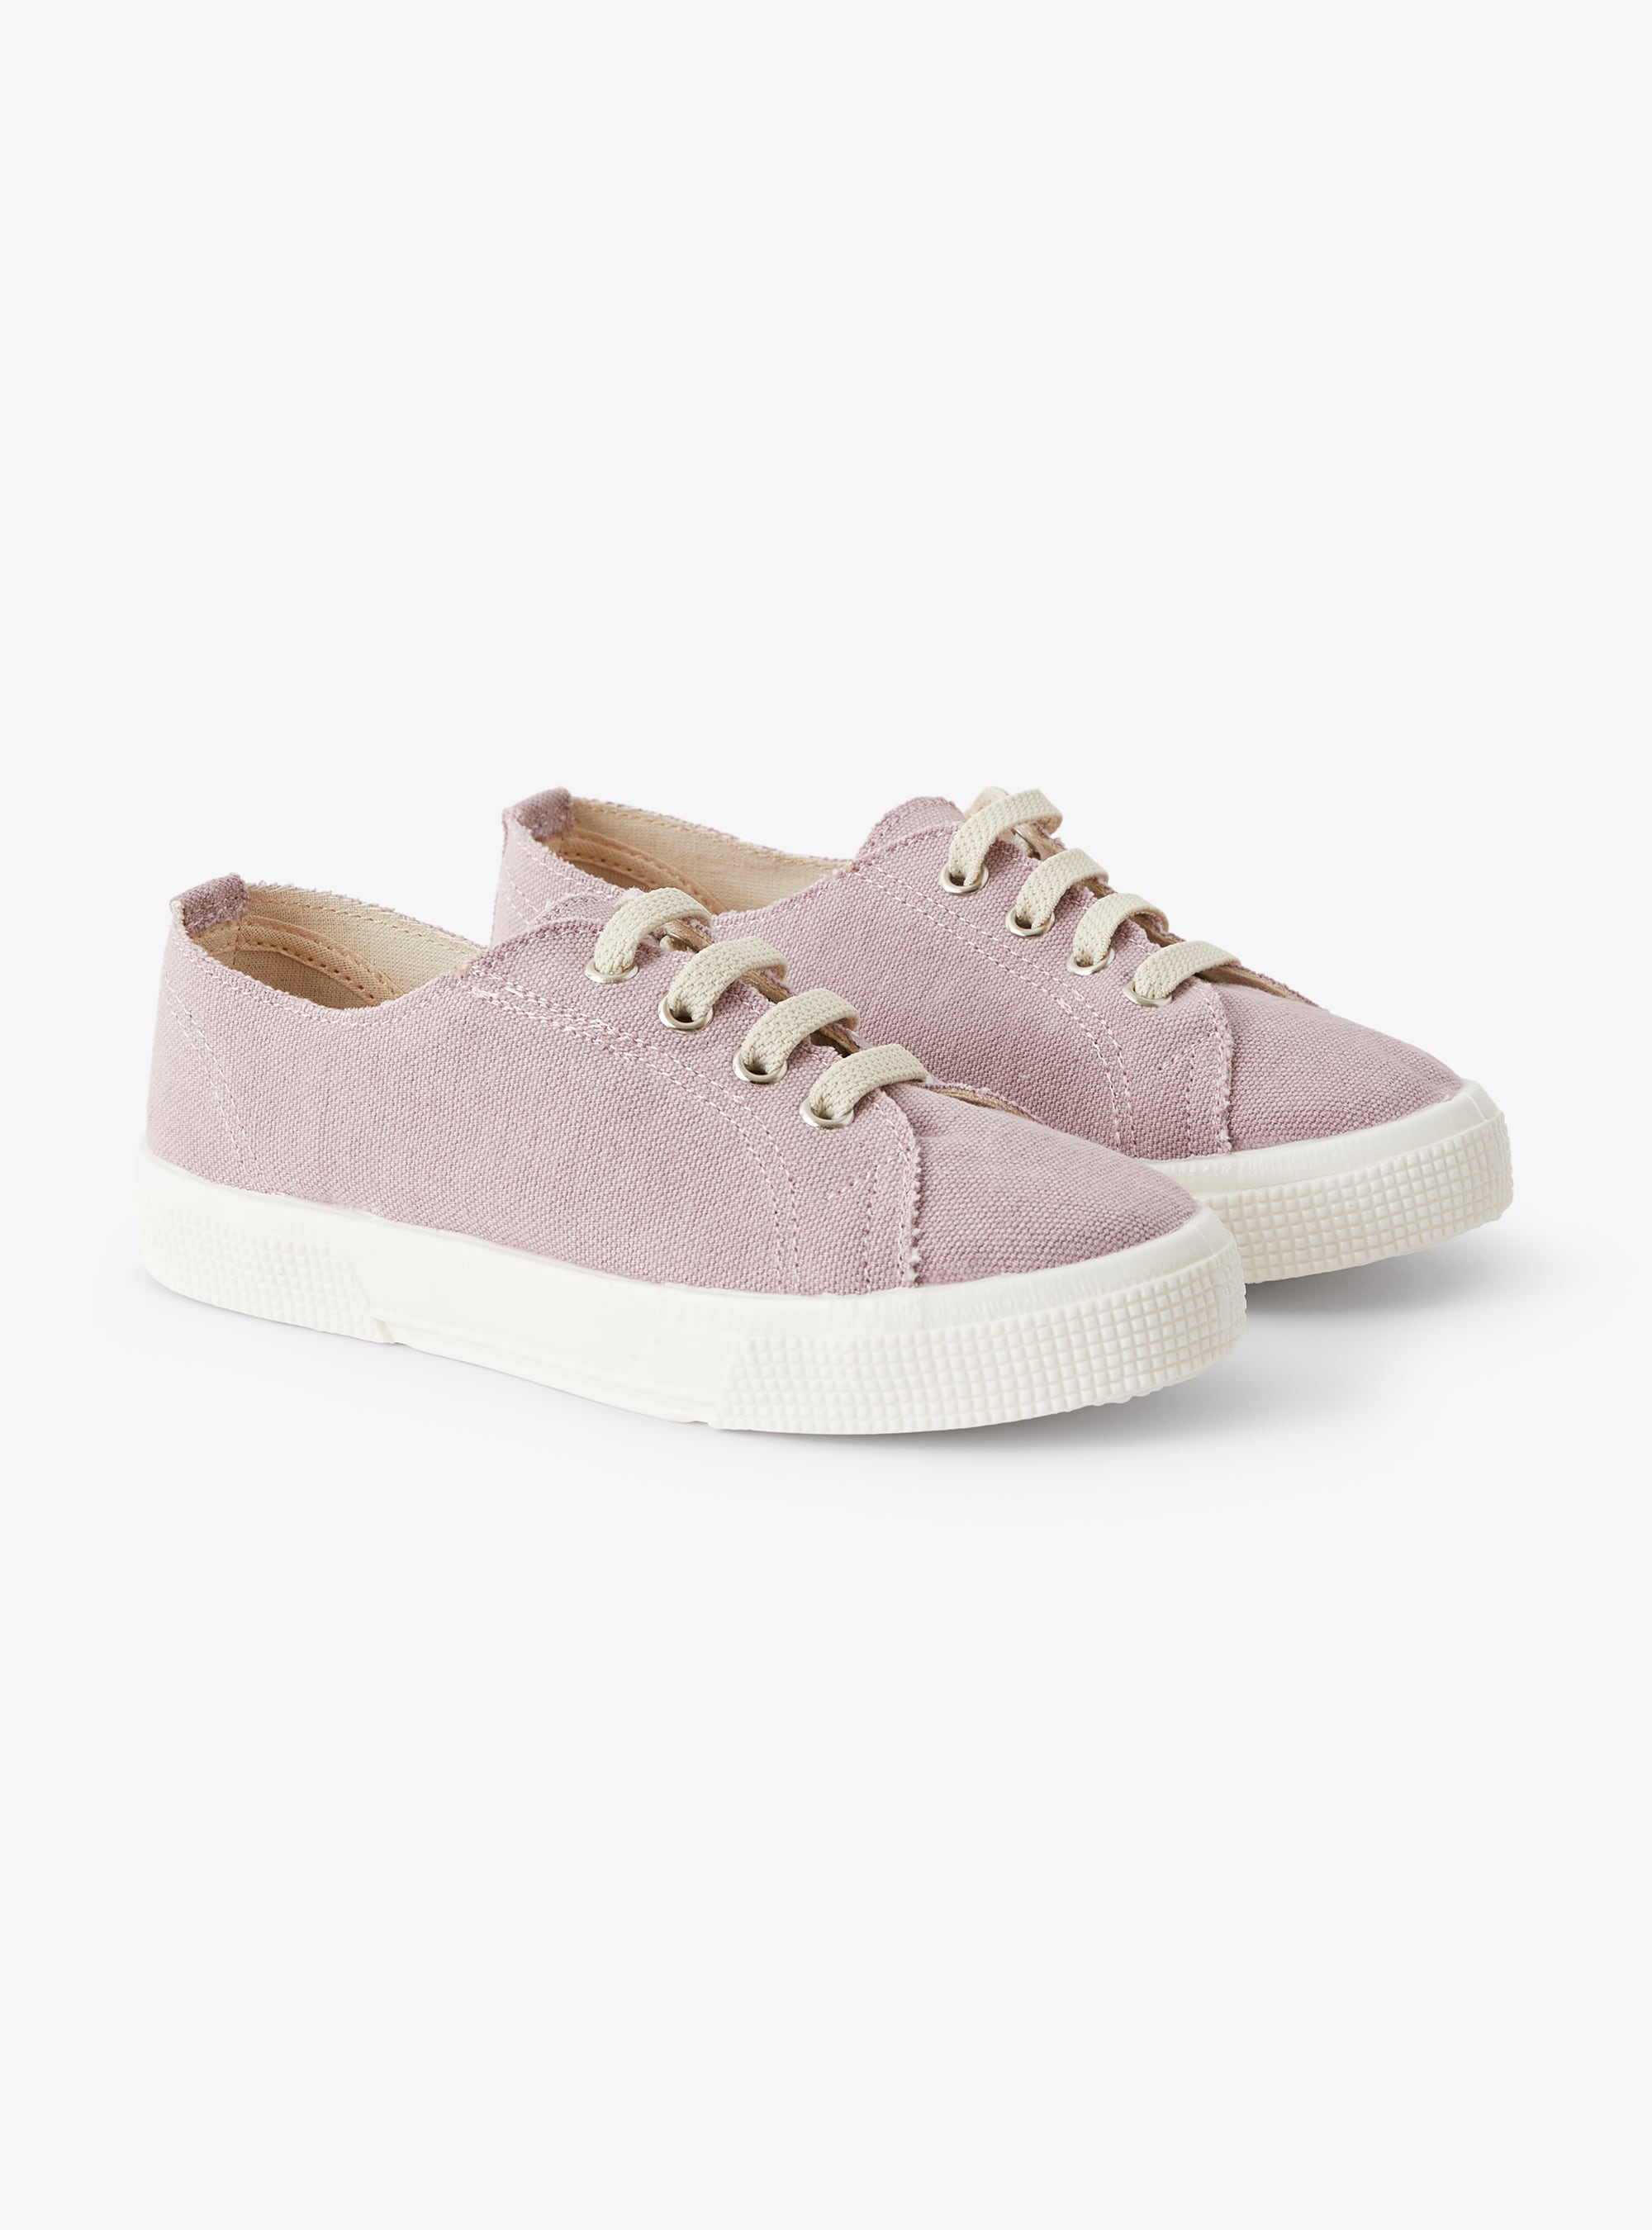 Sneaker in lilac canvas with laces - Pink | Il Gufo